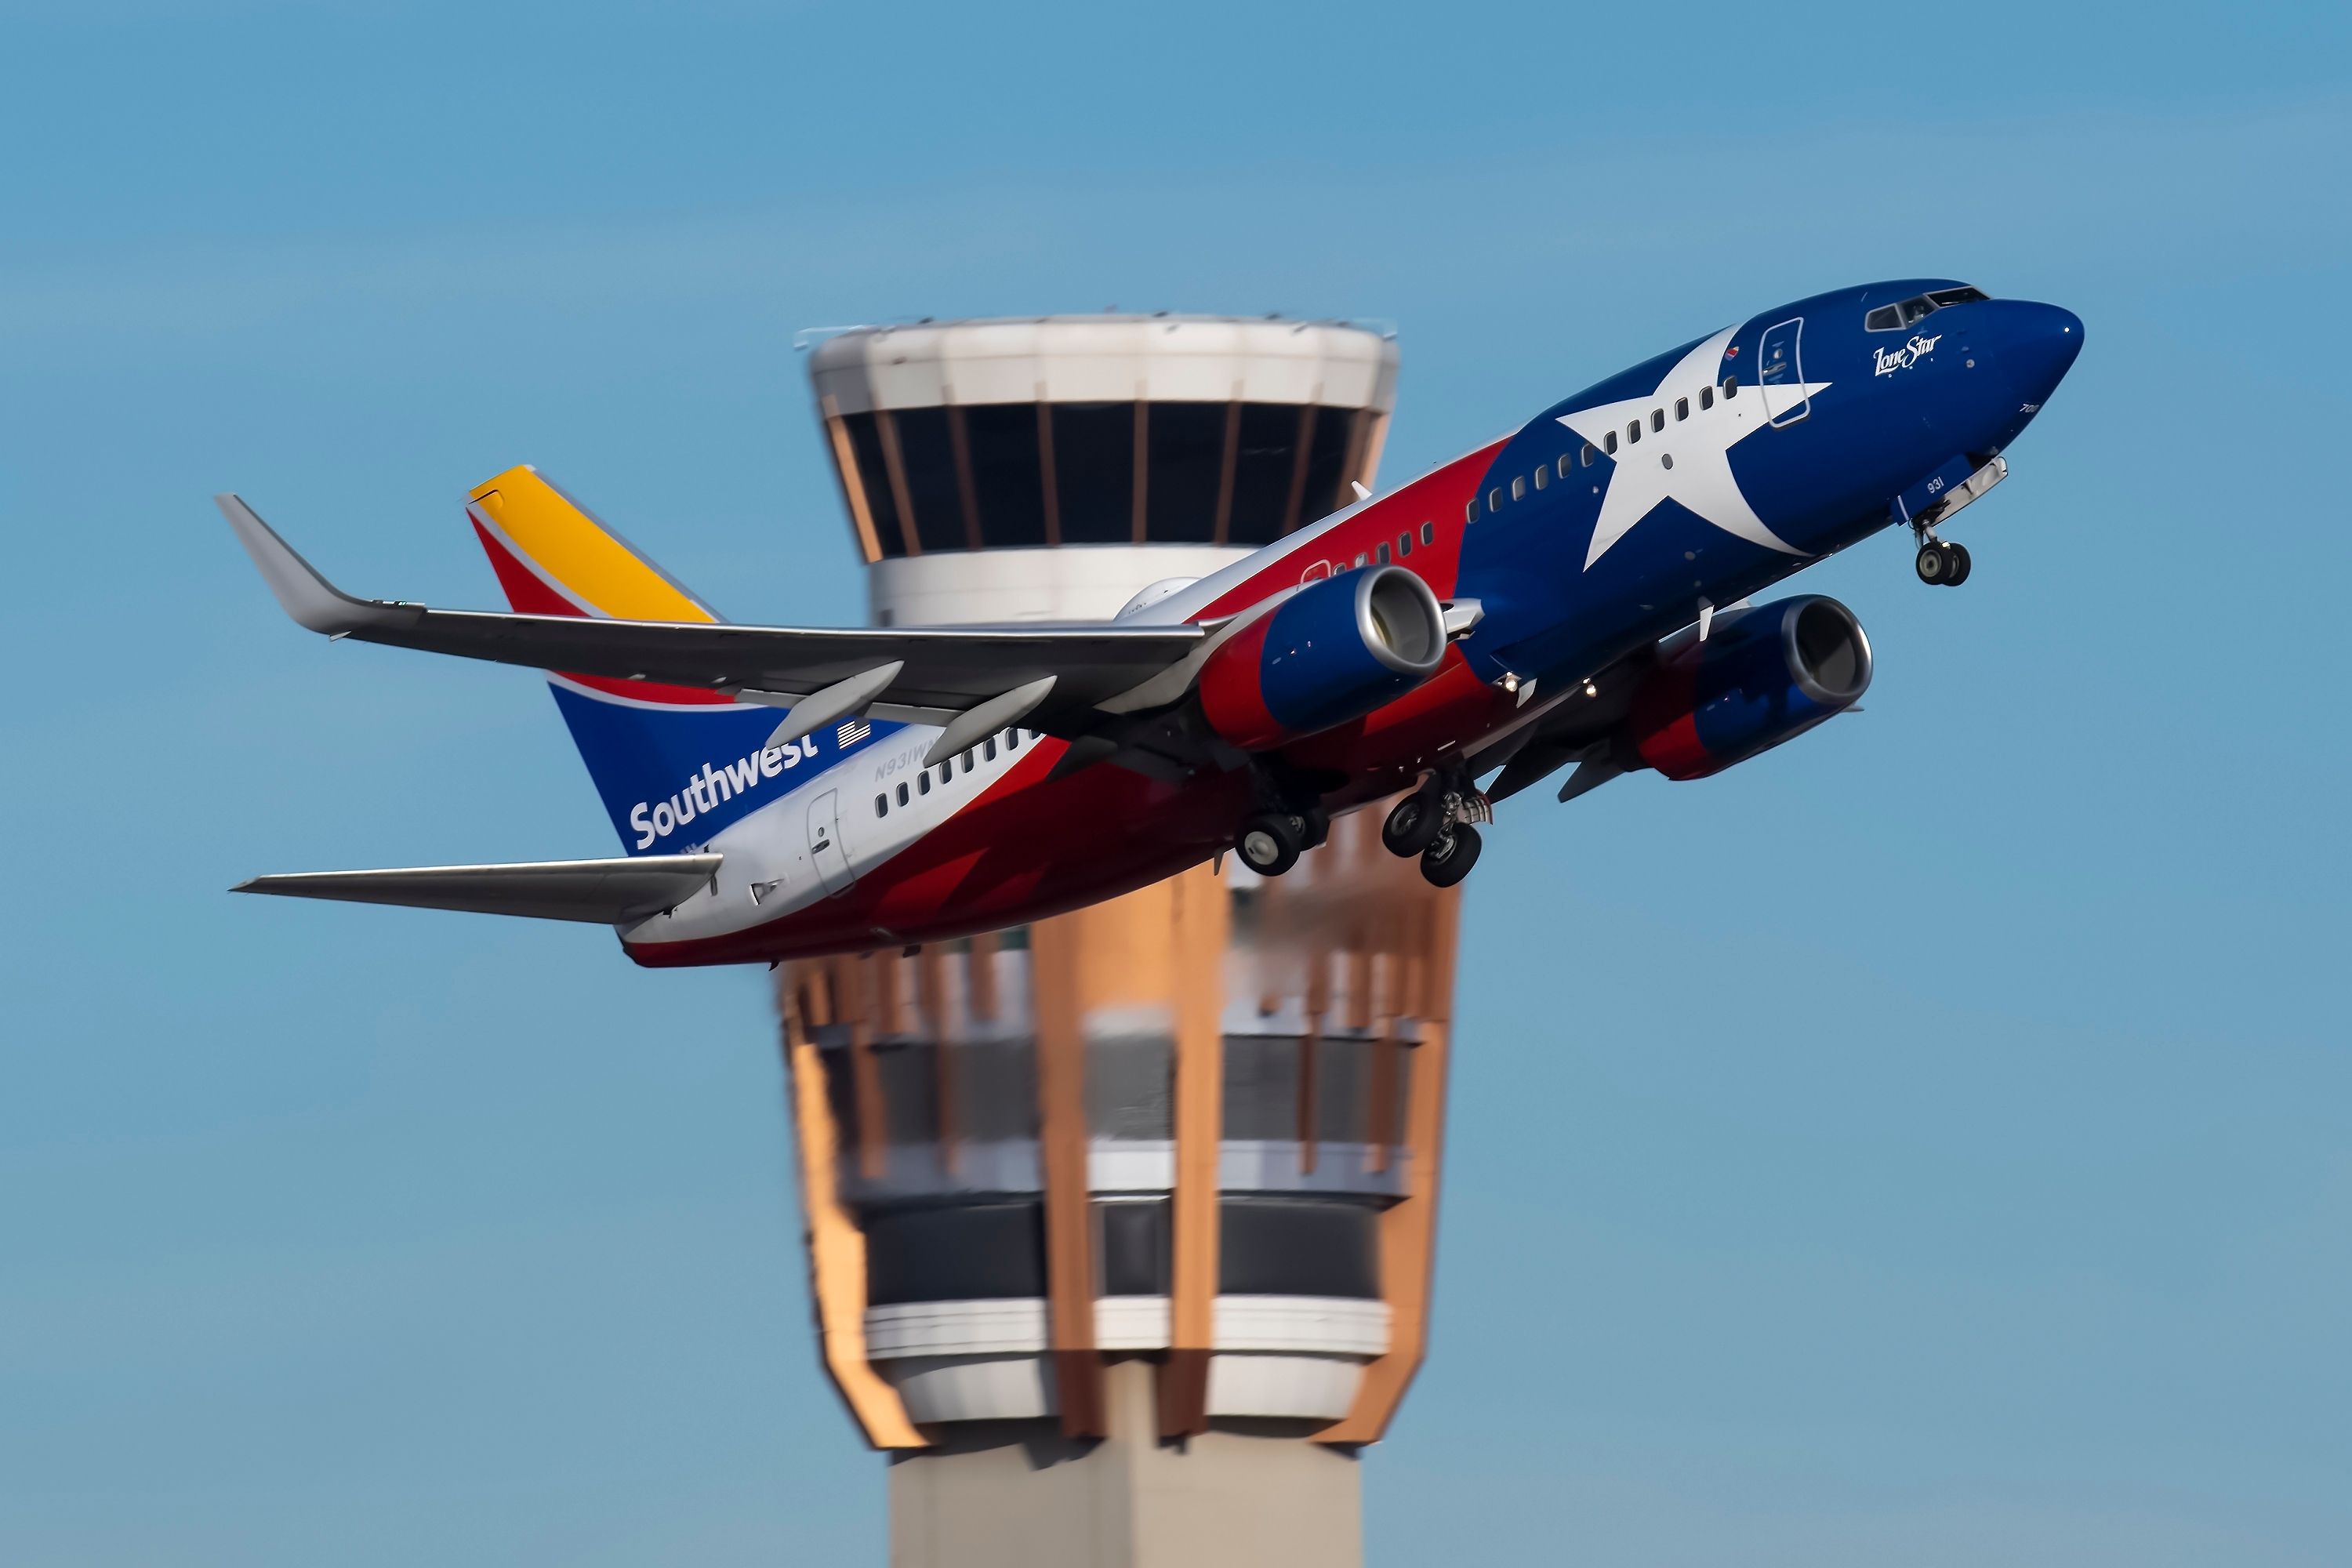 Southwest 737 taking off from Phoenix Sky Harbor Airport